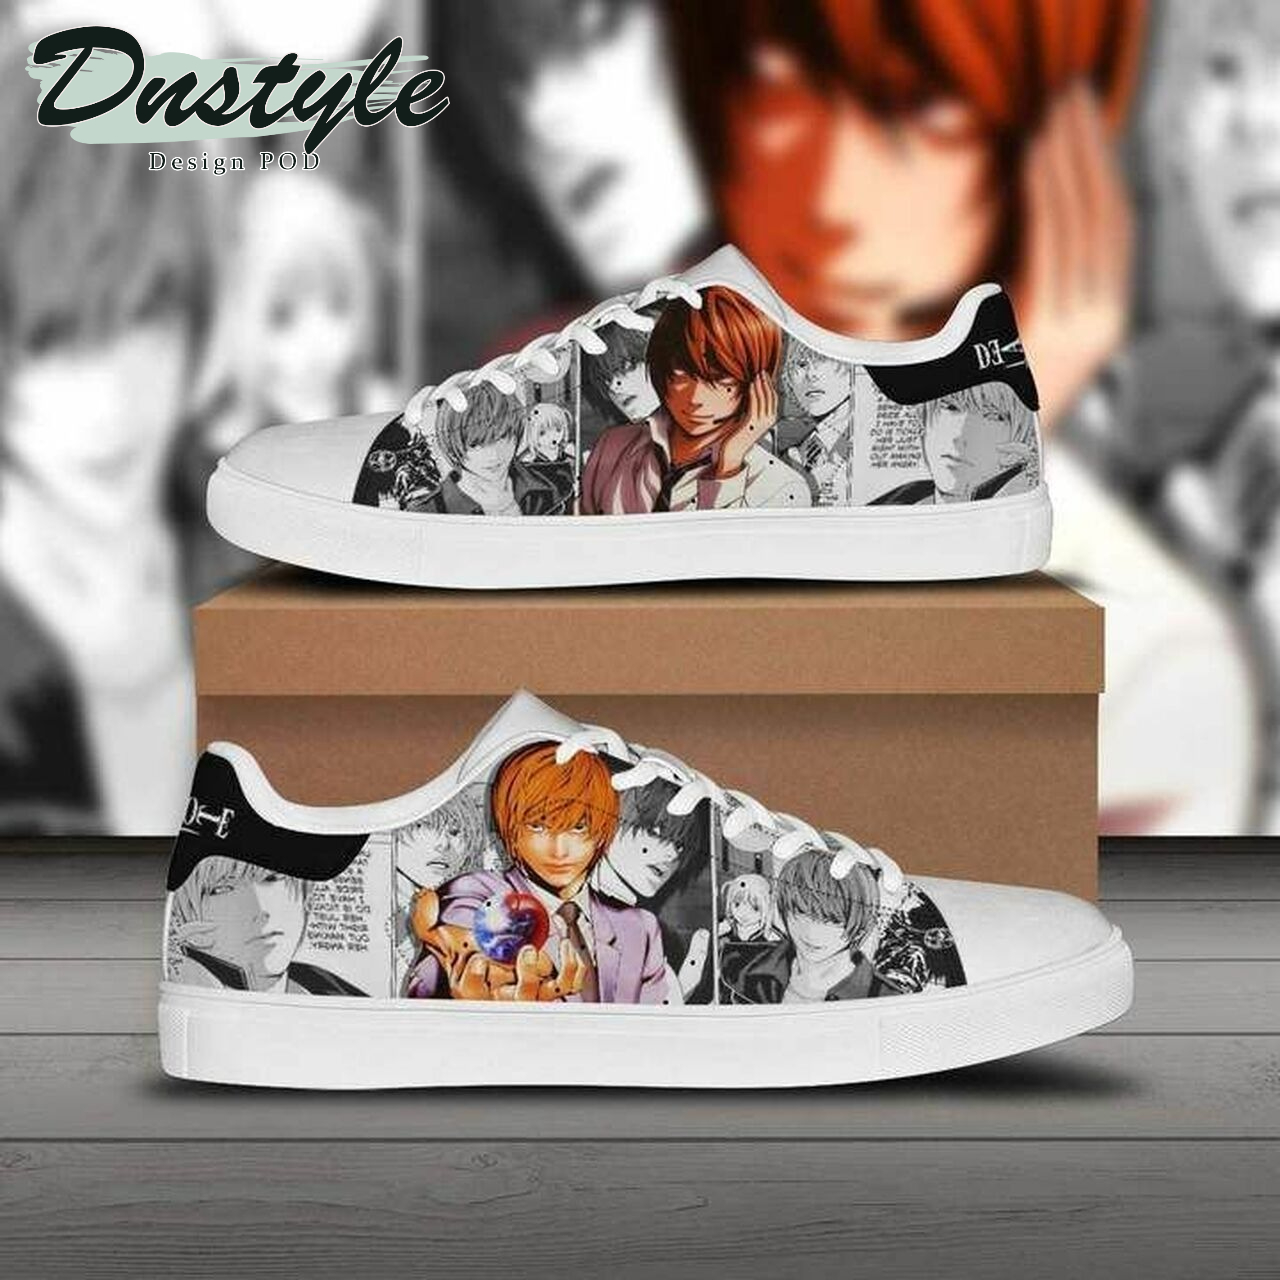 NFL light yagami death note custom stan smith low top skate shoes